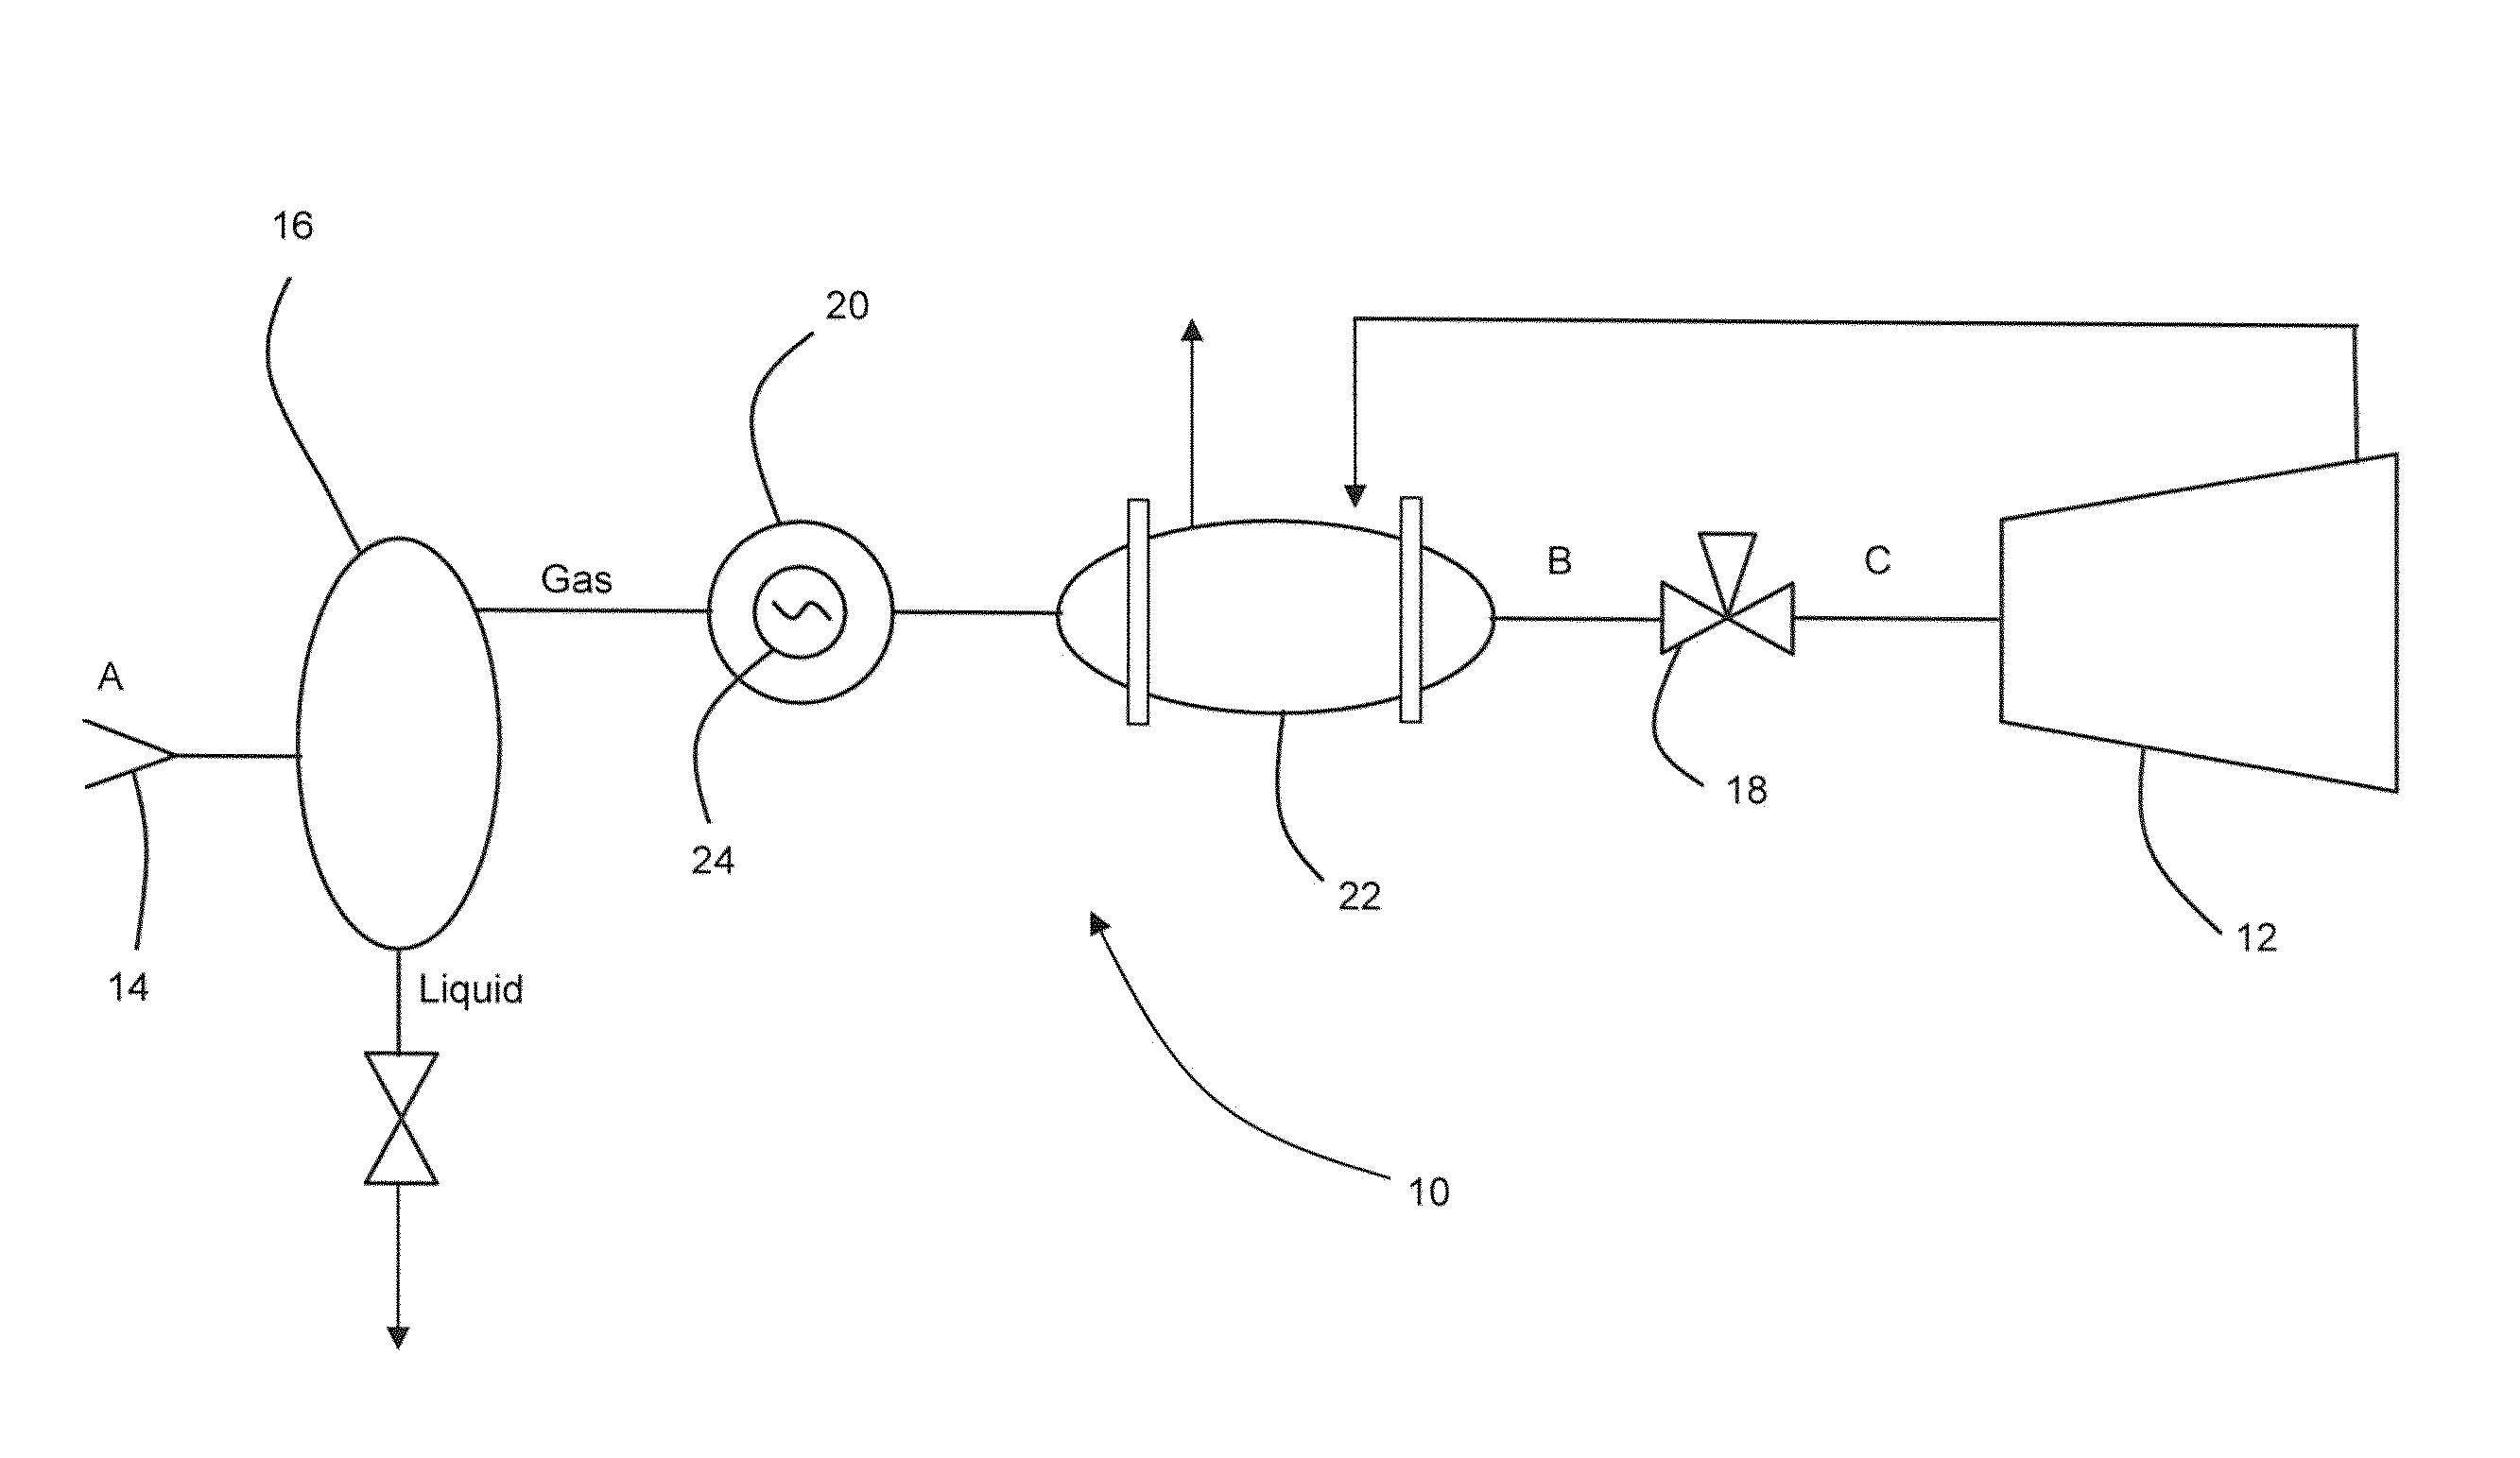 System and method for supplying fuel to a gas turbine